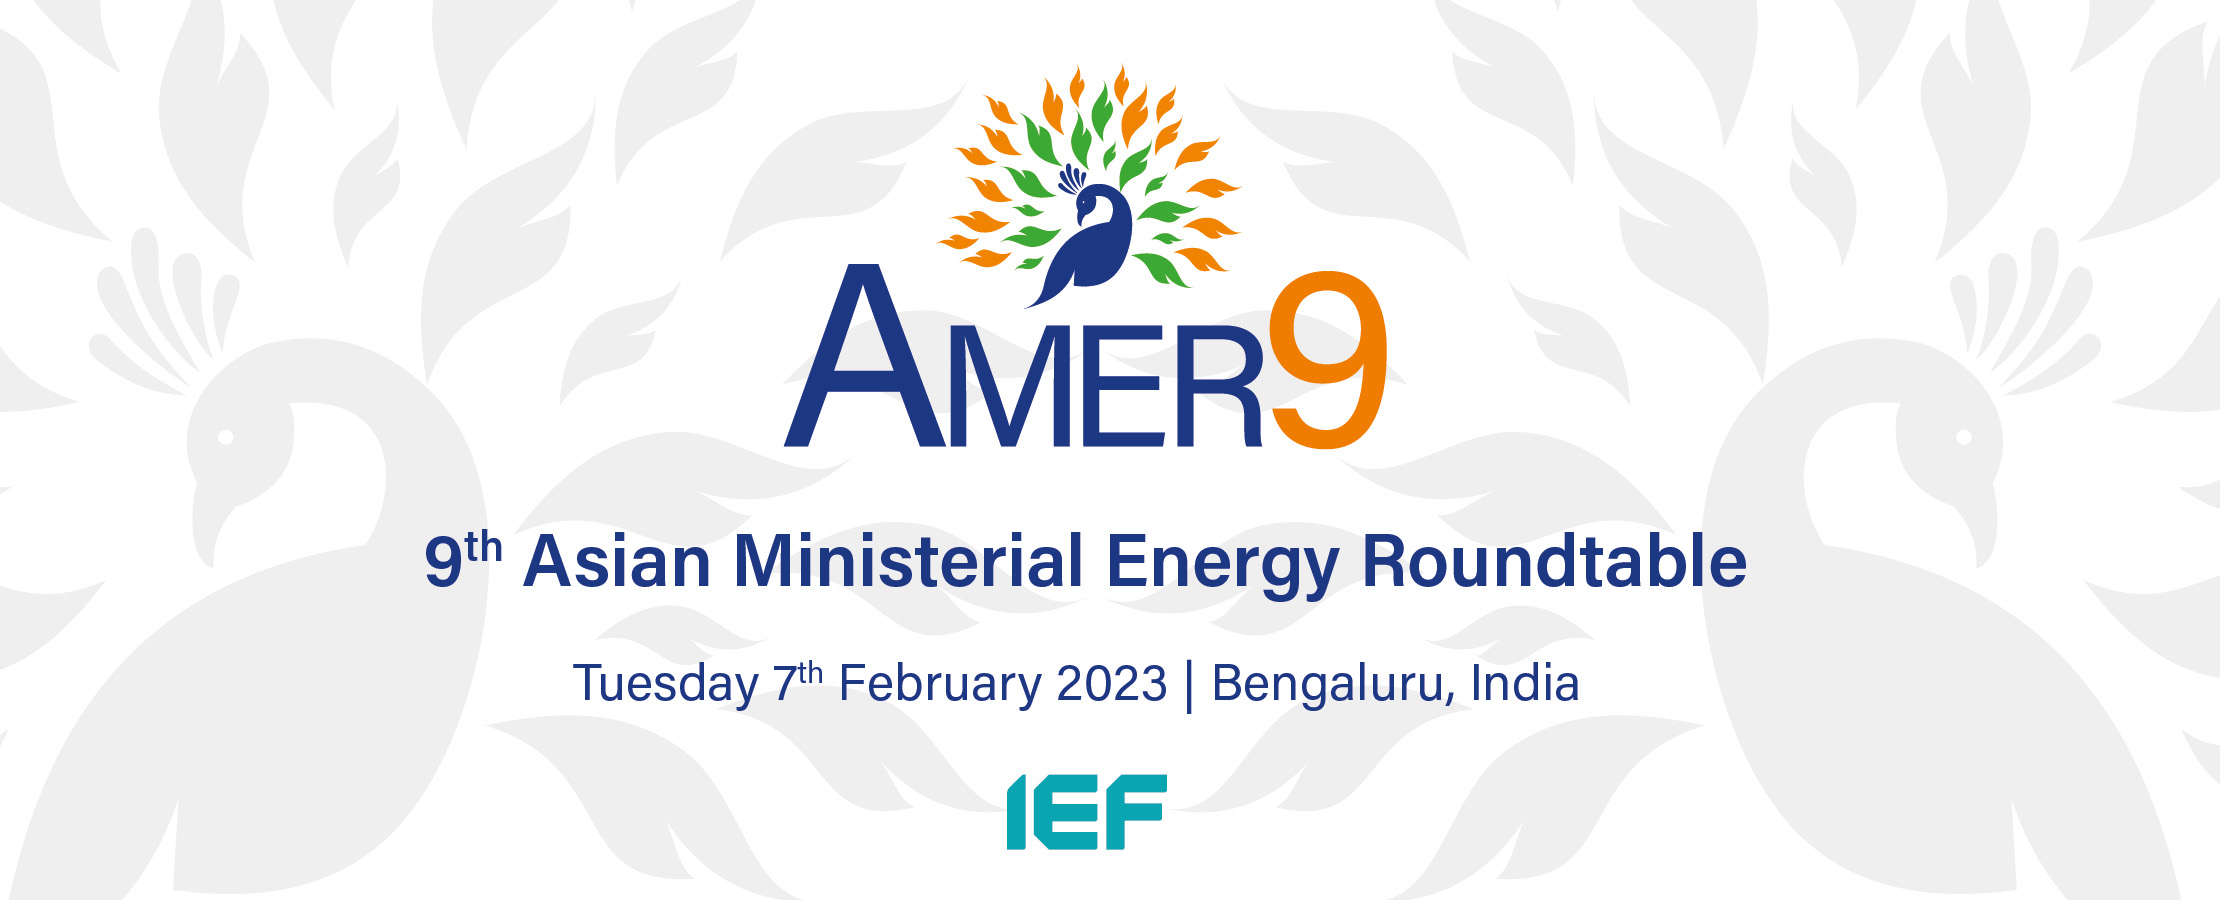 9th Asian Ministerial Energy Roundtable